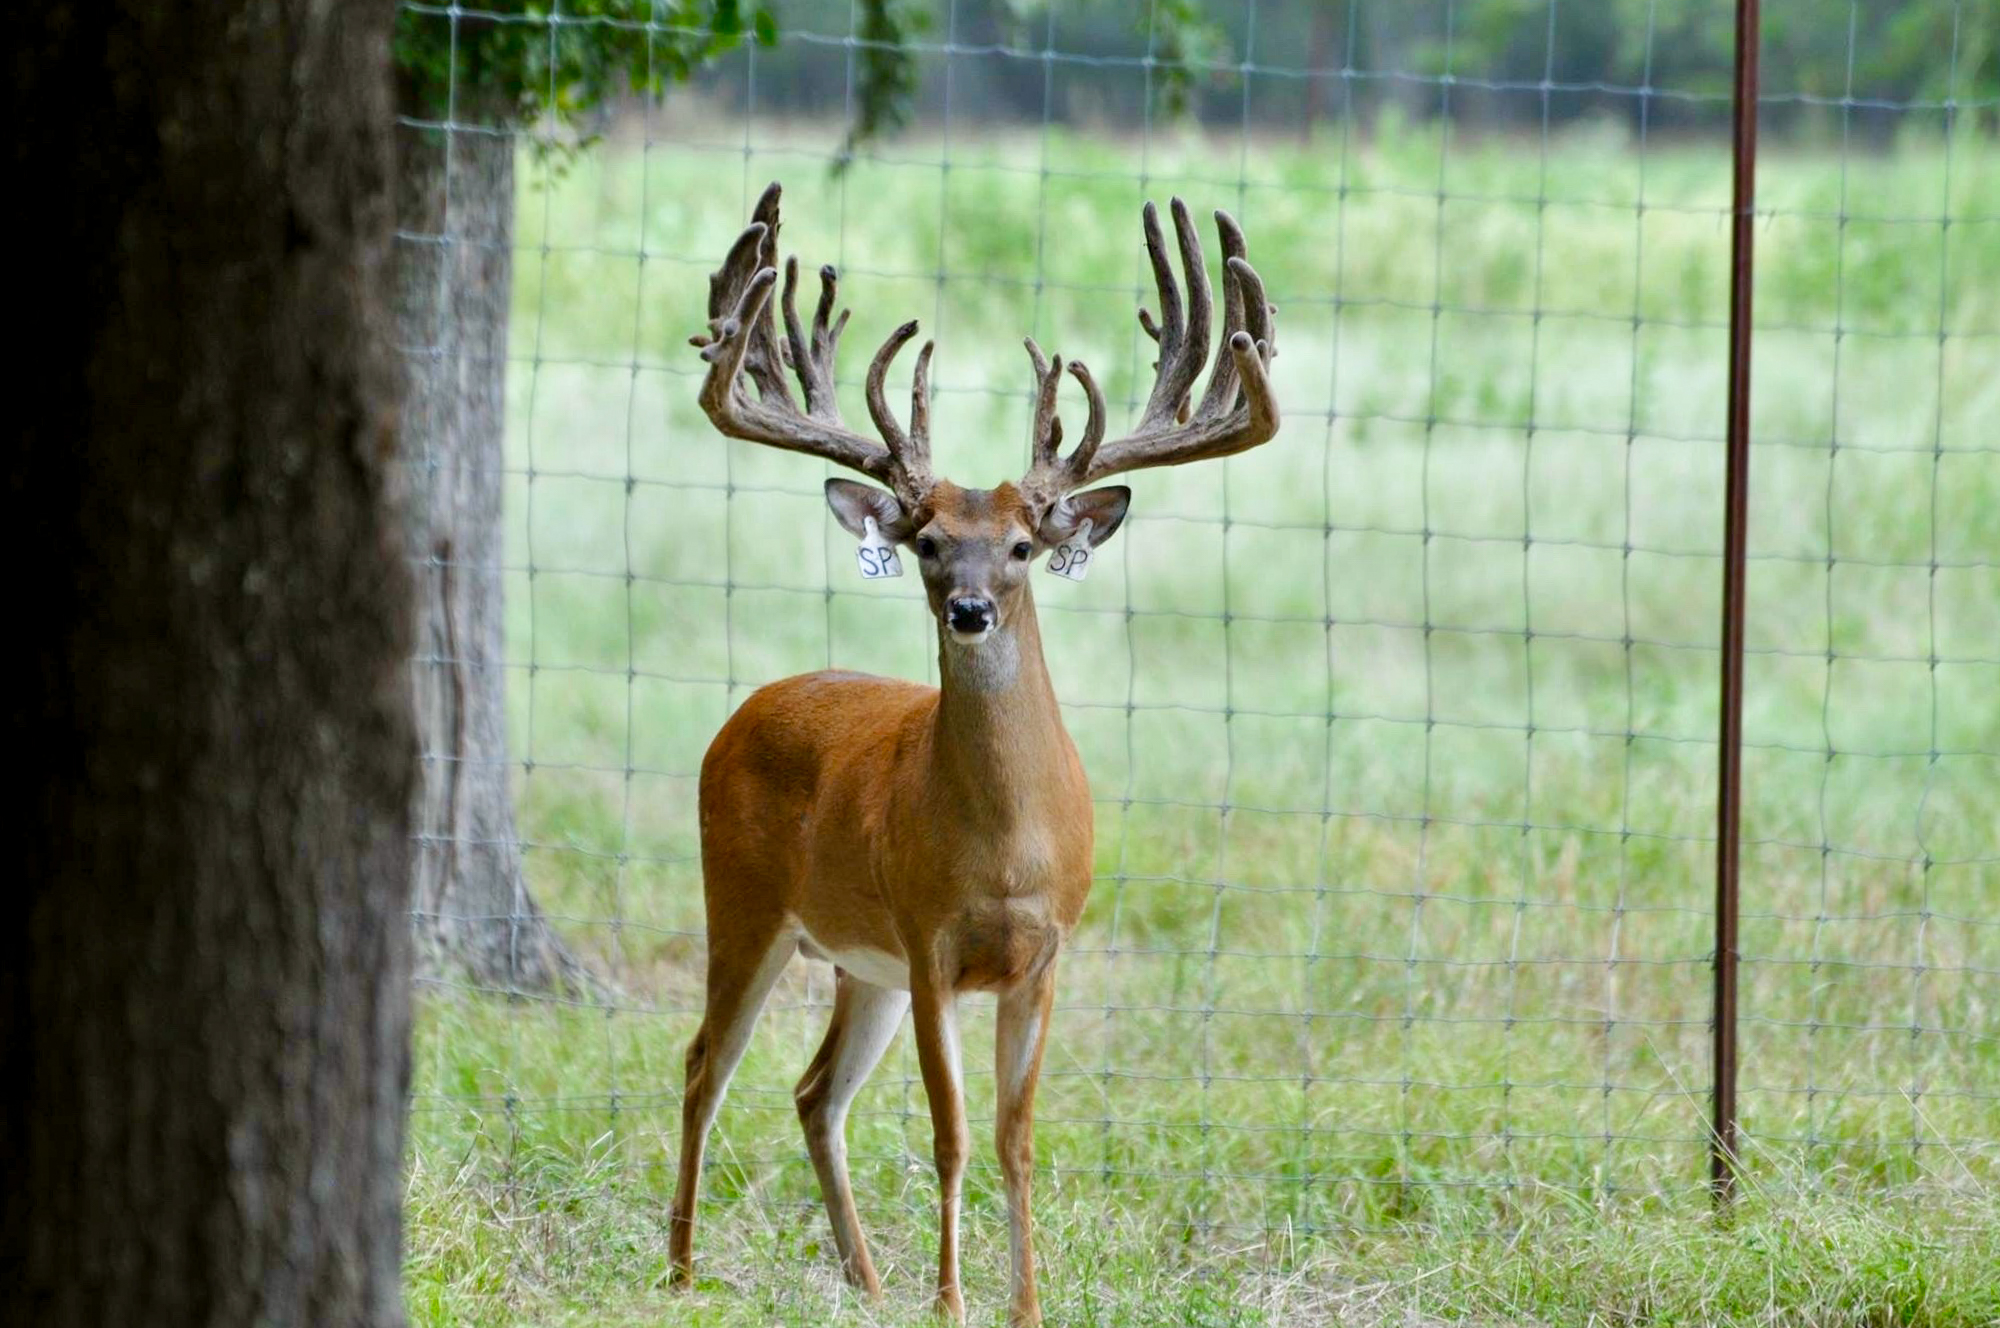 Texas deer breeders are now required to live test every animal before it is moved or transferred from a breeding pen. 